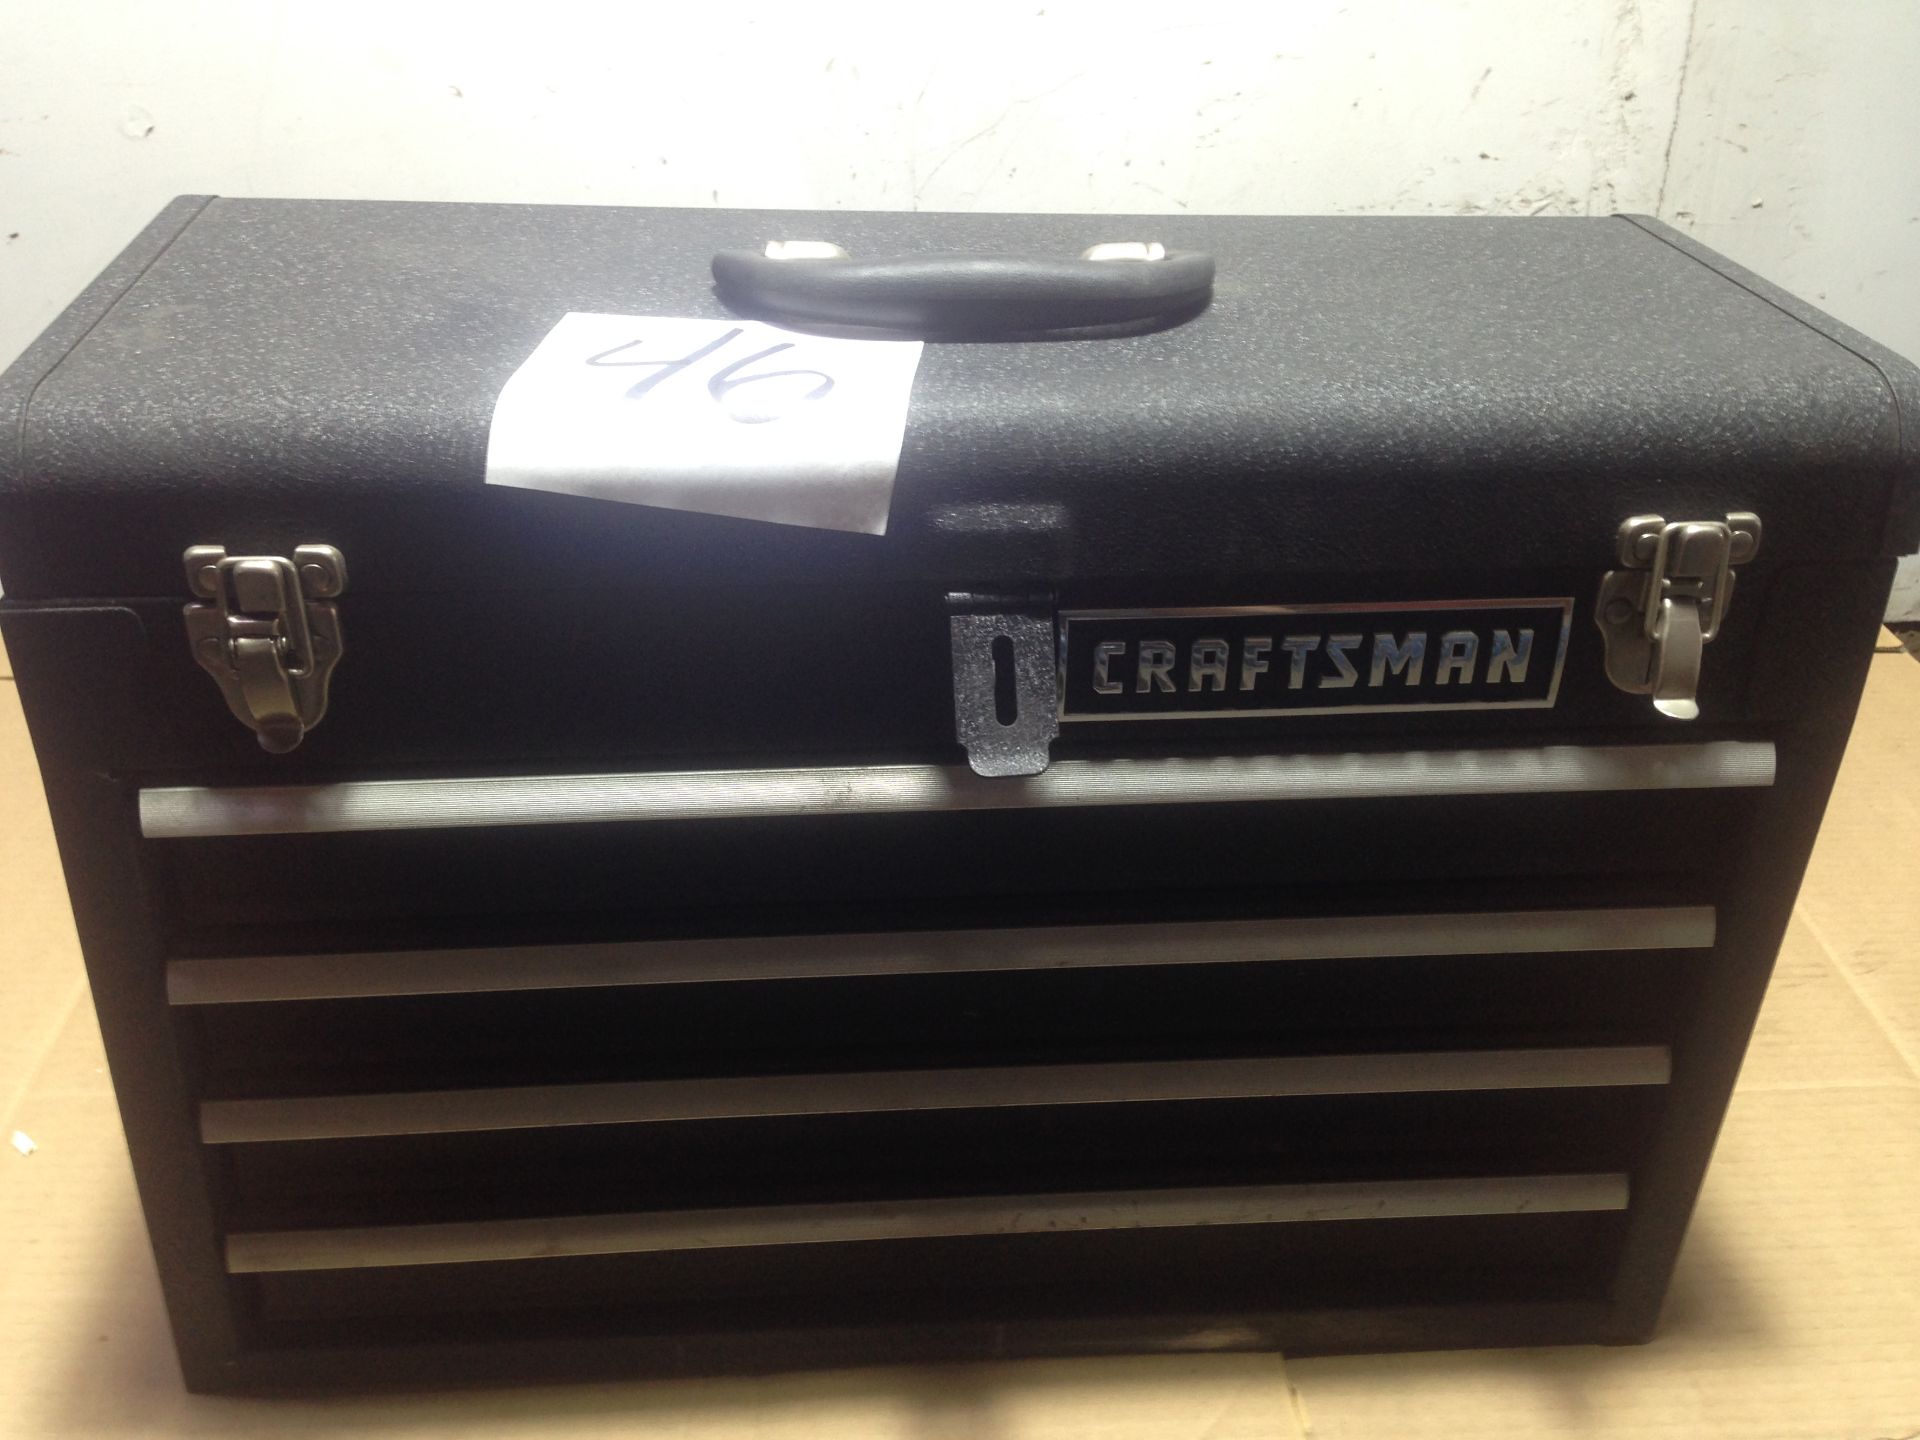 LOT - CRAFTSMAN 4-DRAWER TOOL BOX, W/ CONTENTS TO INCLUDE: WRENCHES, SCREWDRIVERS, ETC.